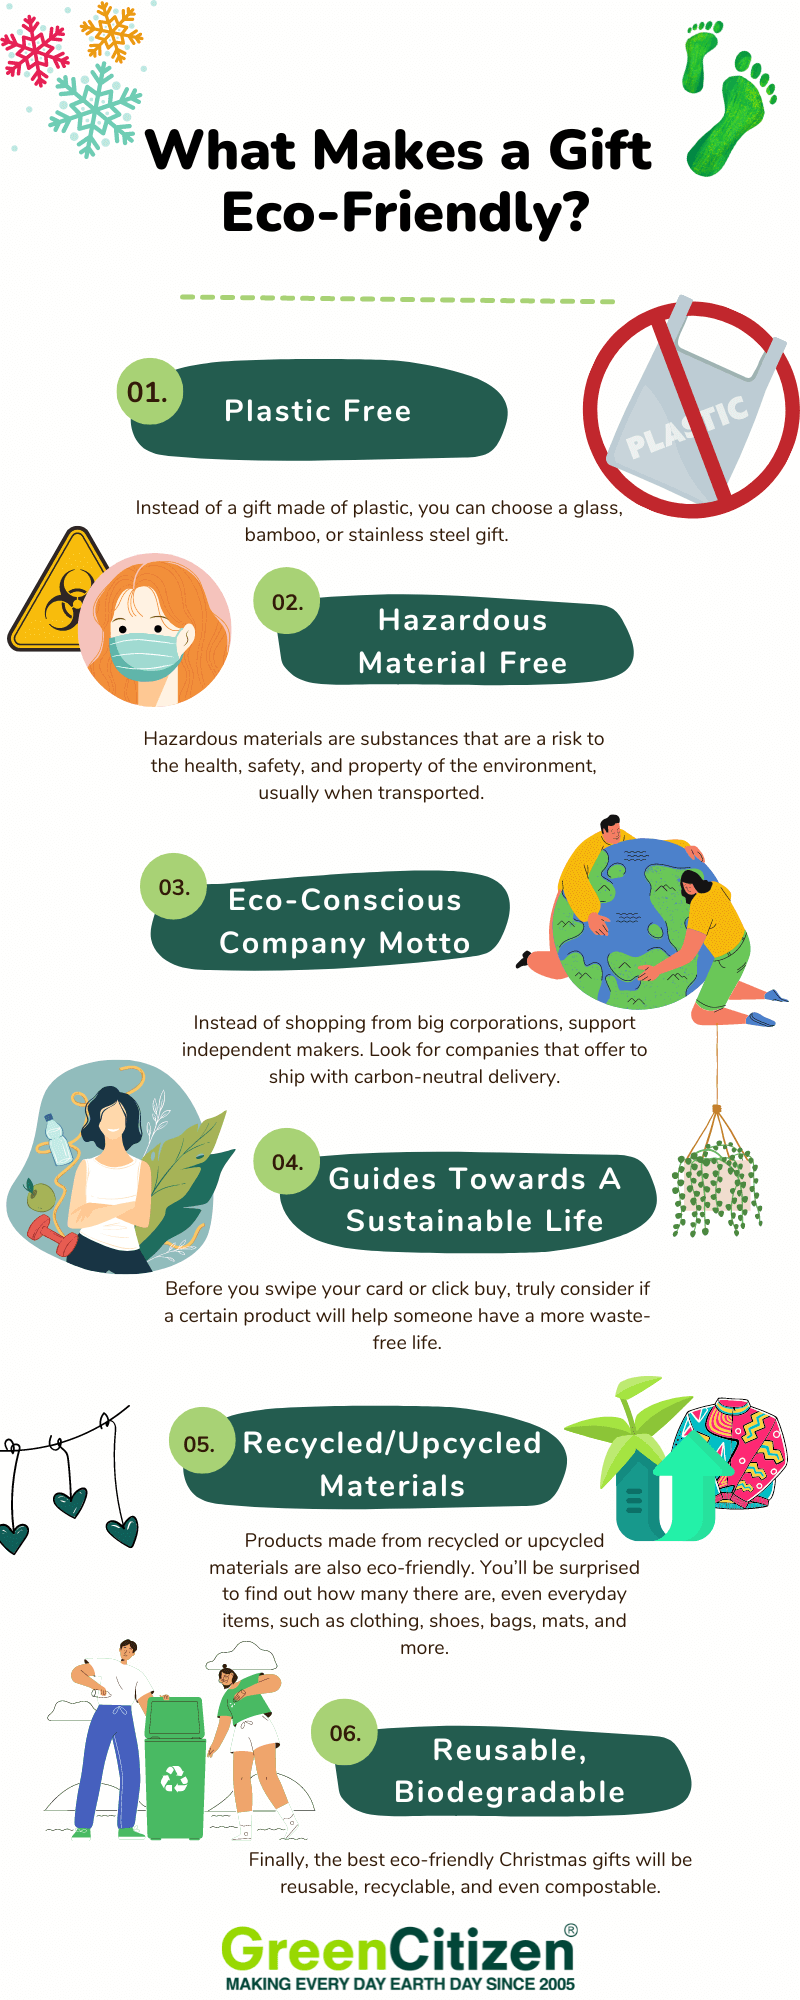 What Makes a Gift Eco-Friendly